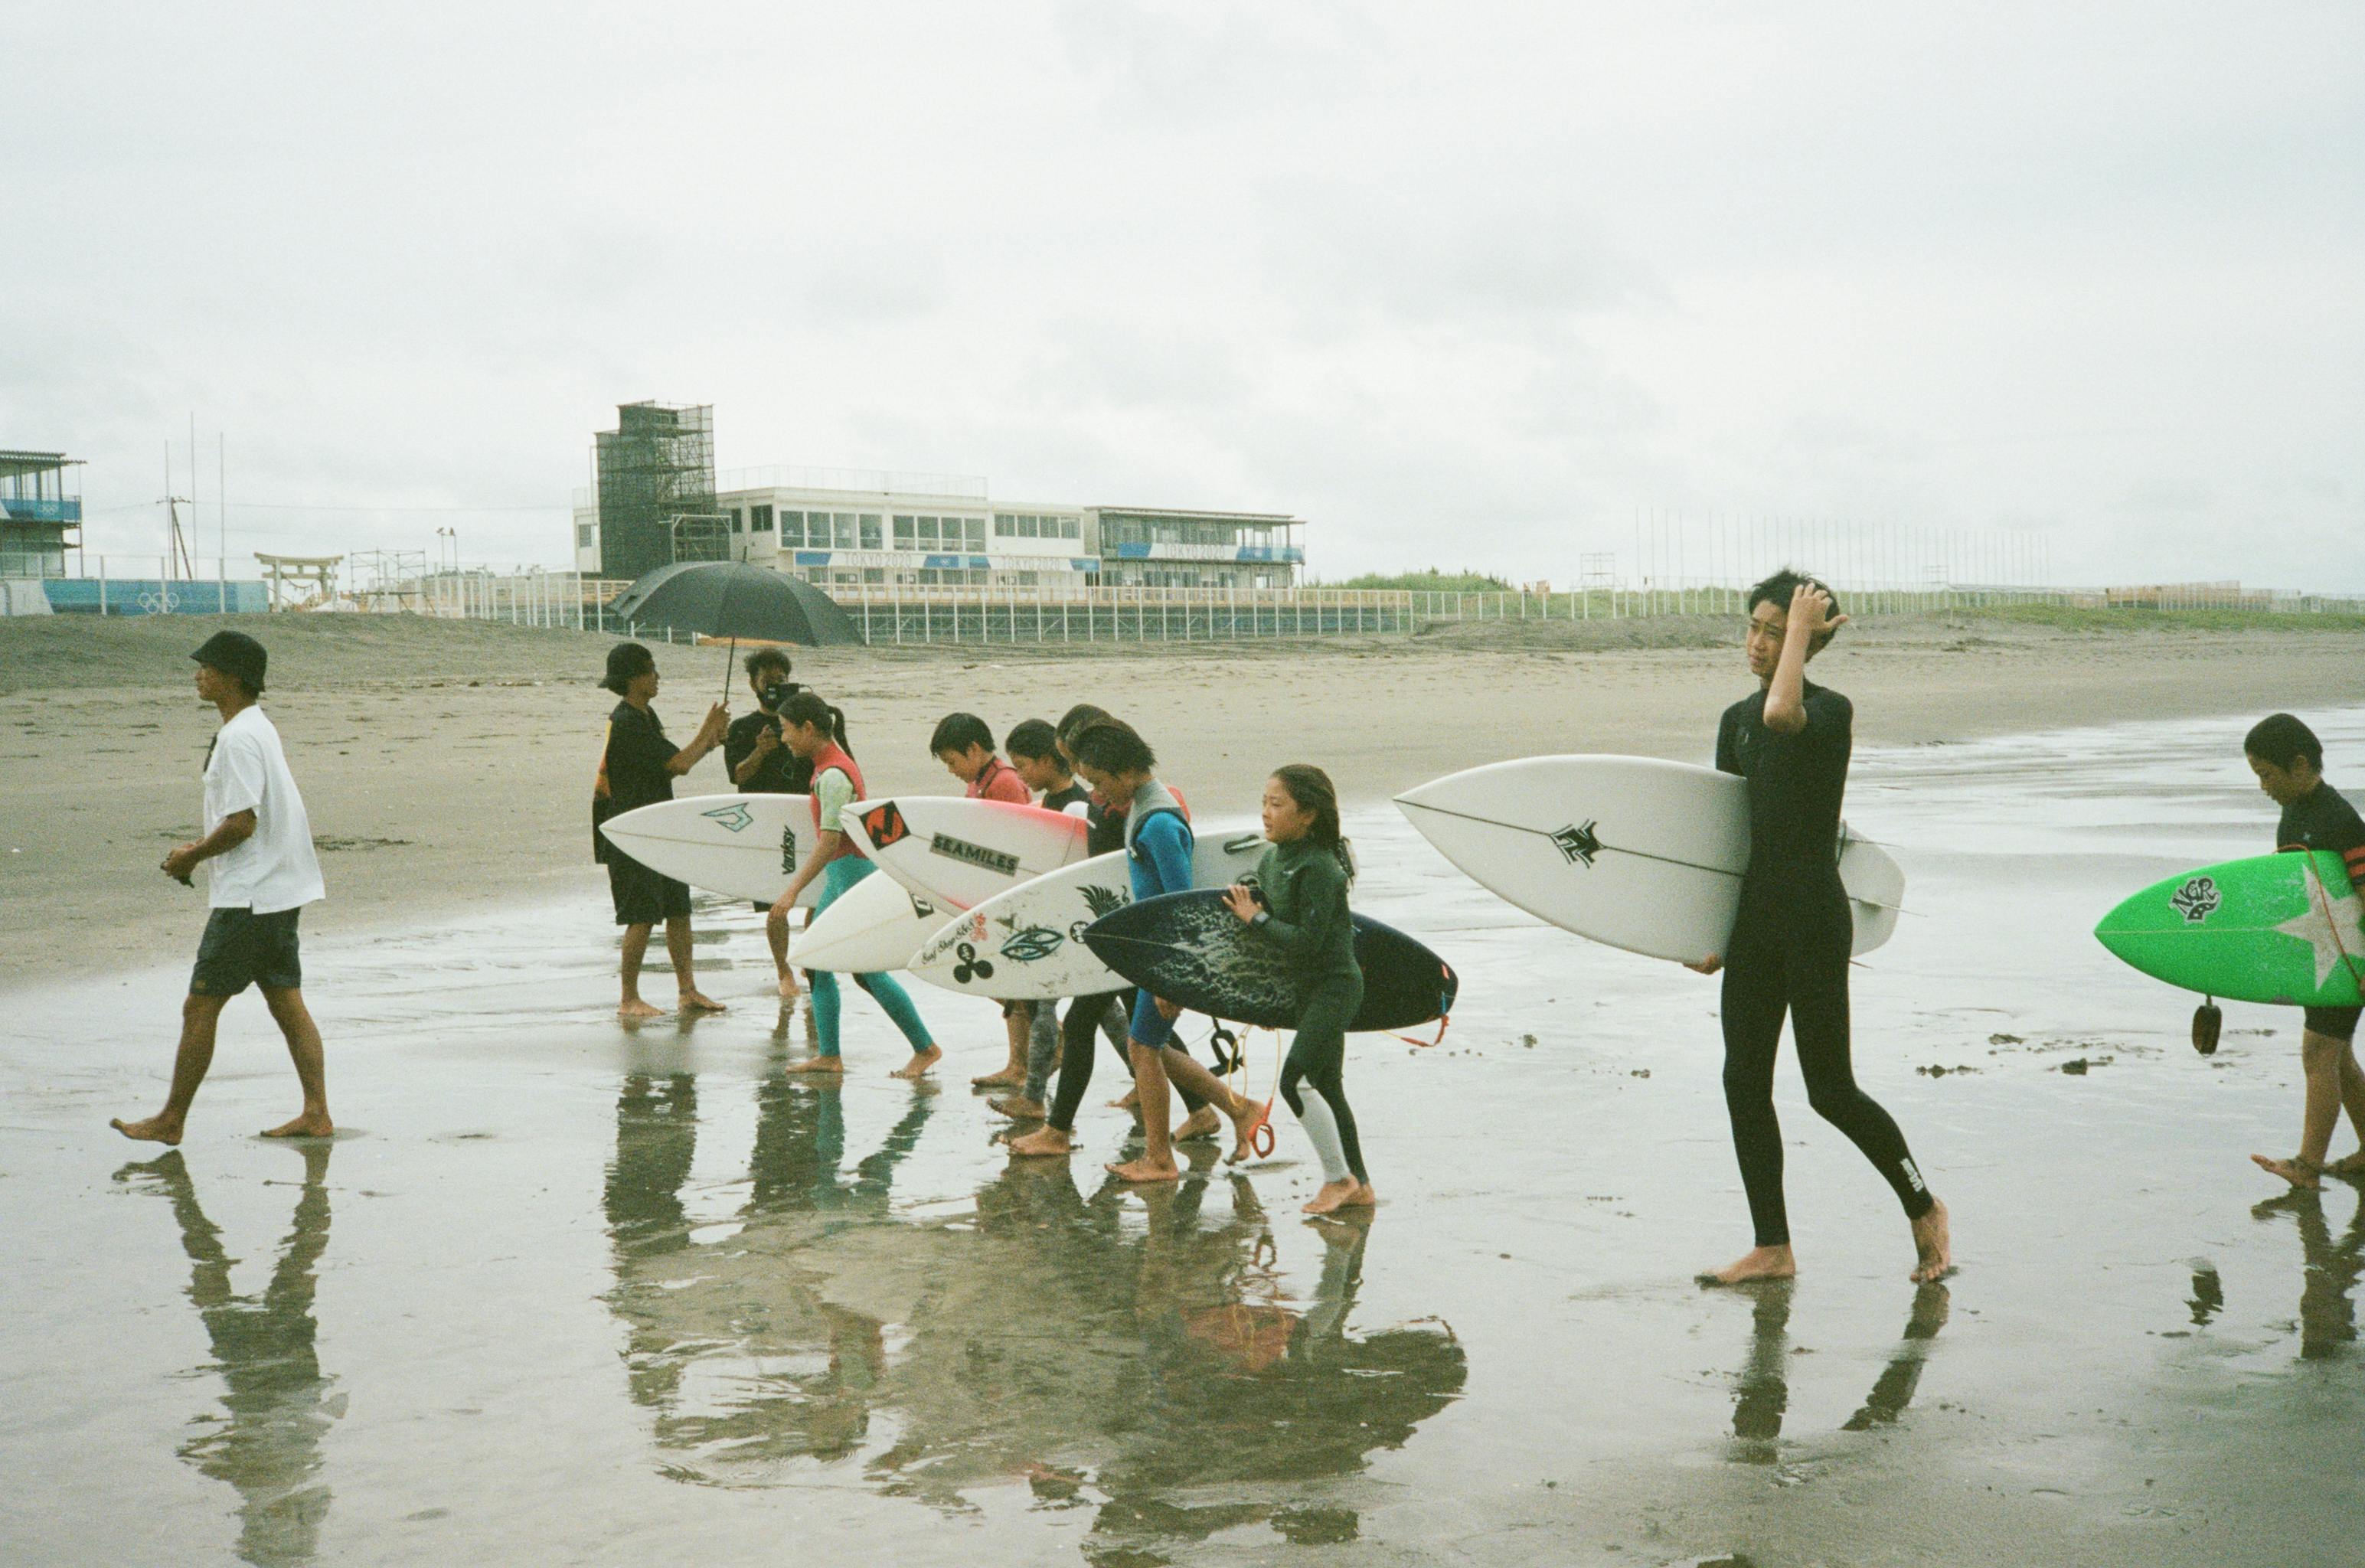 upcoming-studio-wasted-talent-oakley-surf-in-japan-future-kids.jpg